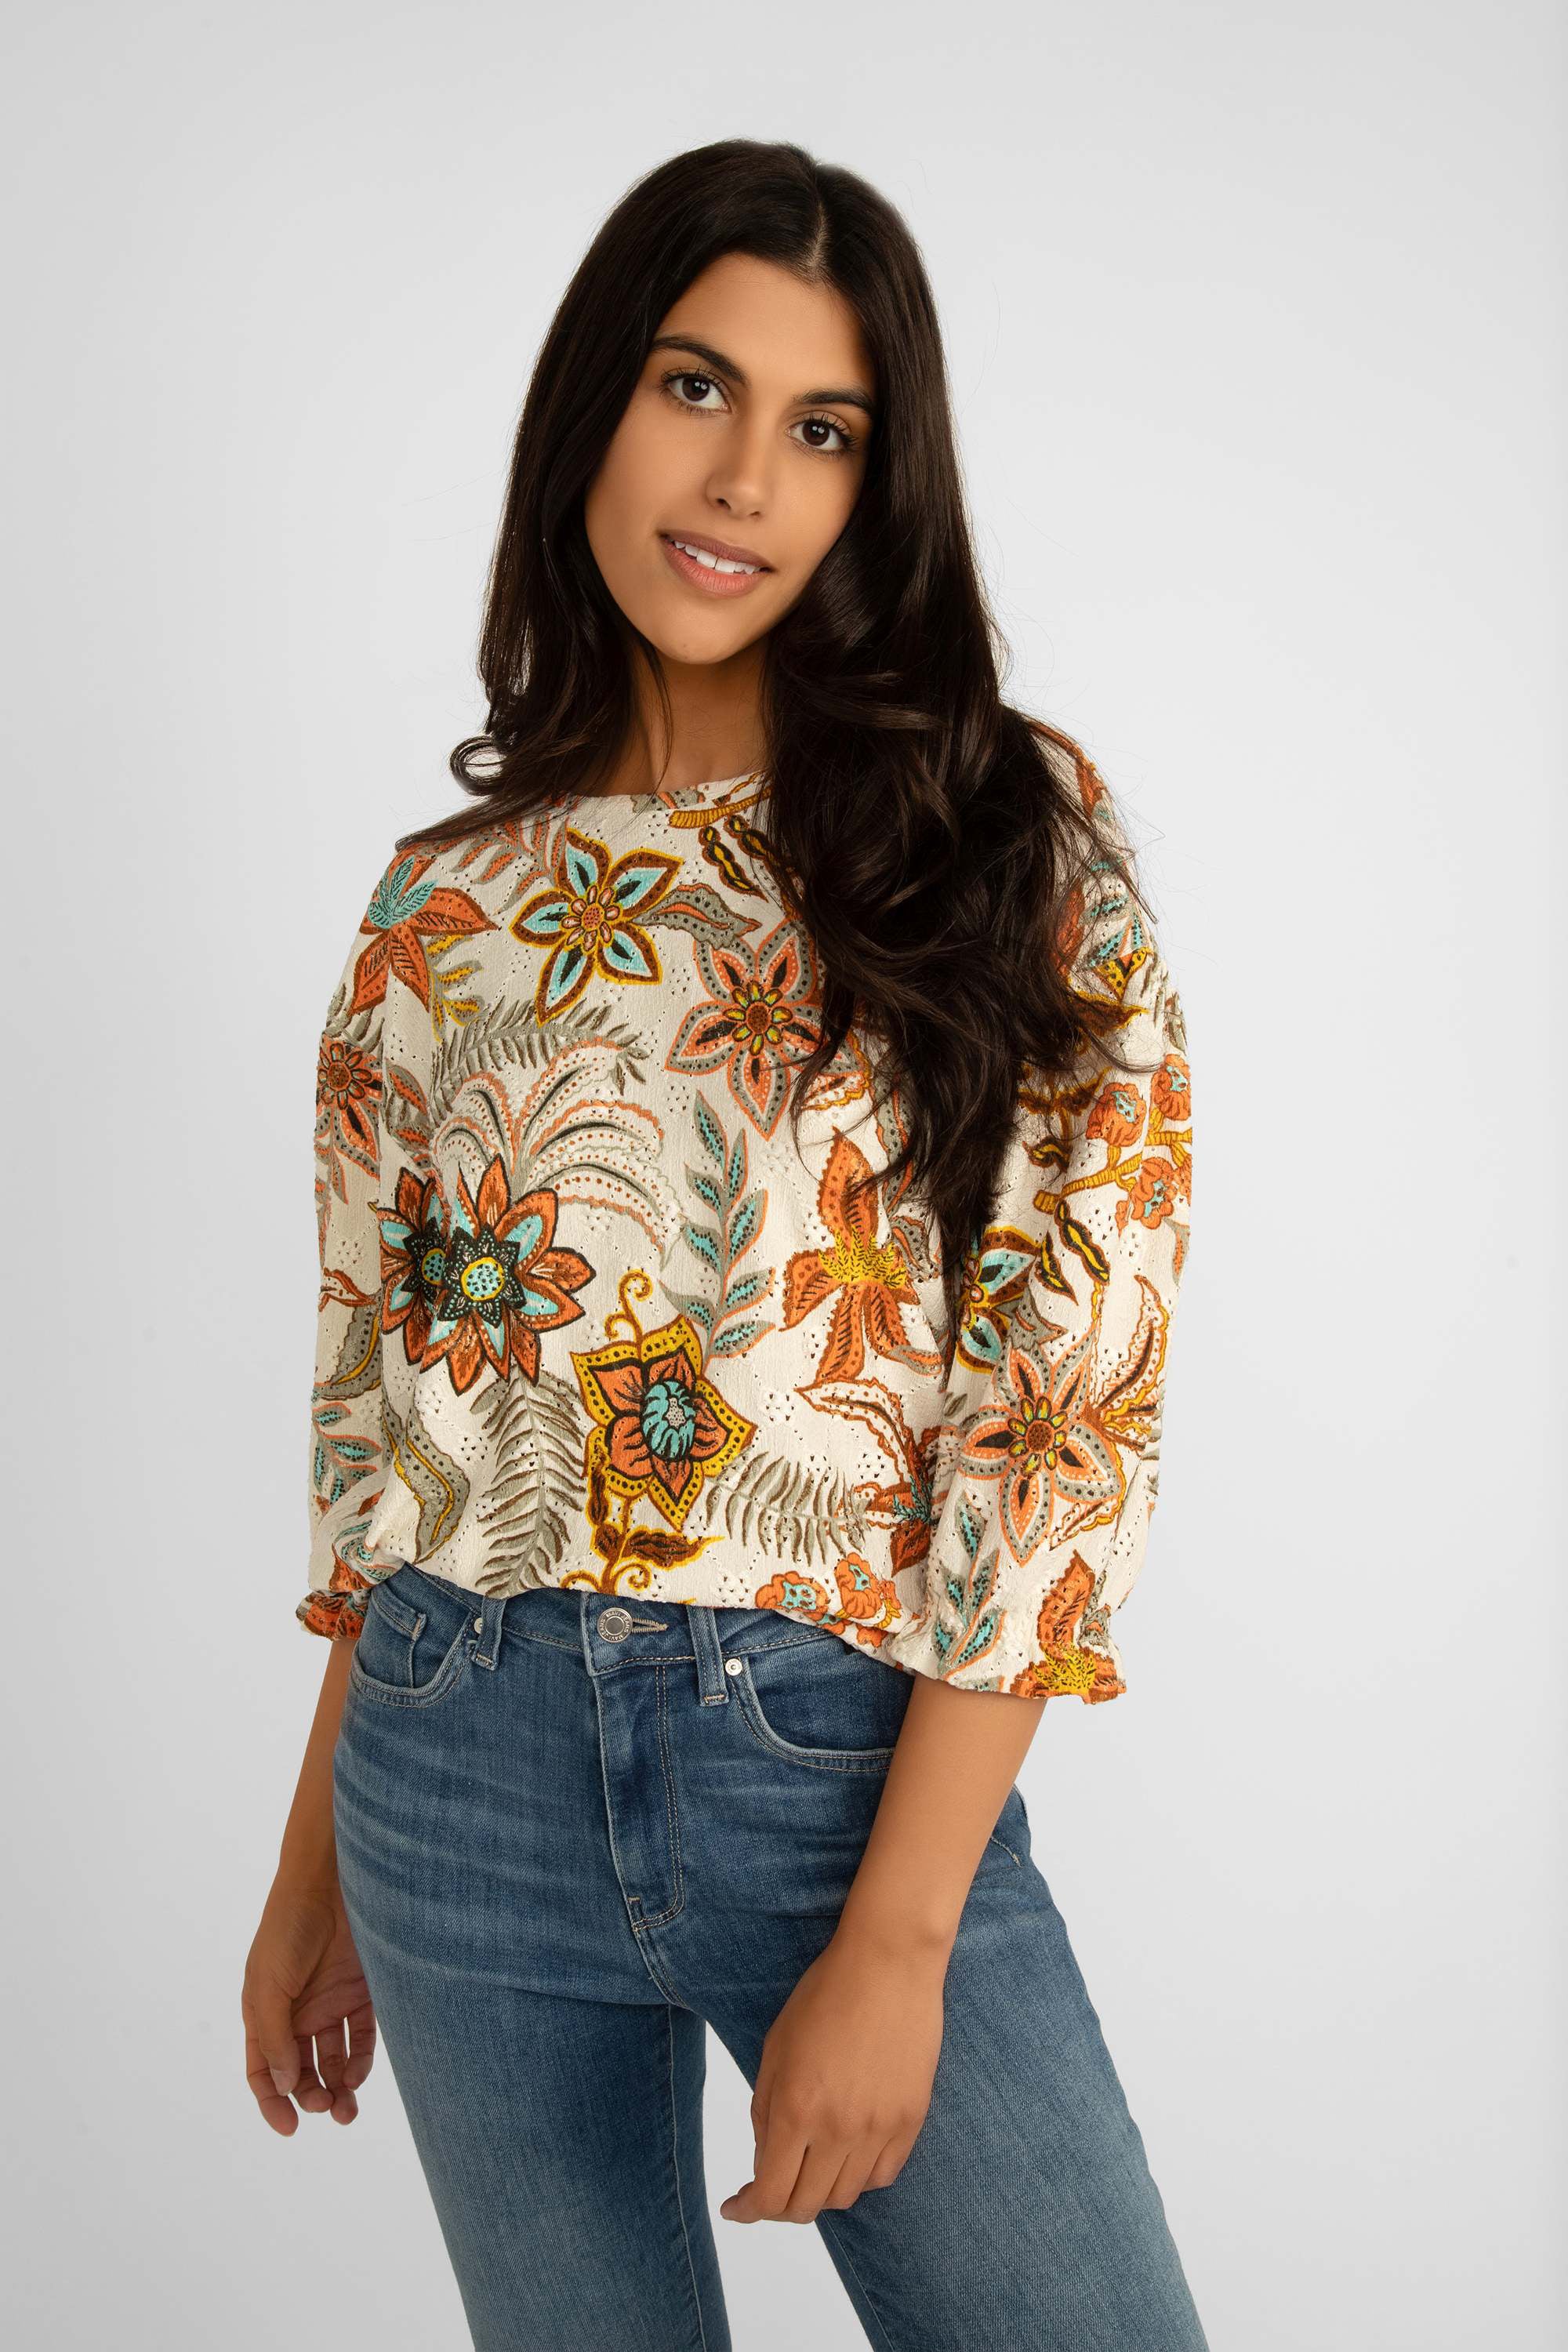 Front view of Garcia (Q40007) Women's Elbow Puff Sleeve Top with Back Cutoff in Retro Orange Floral Print